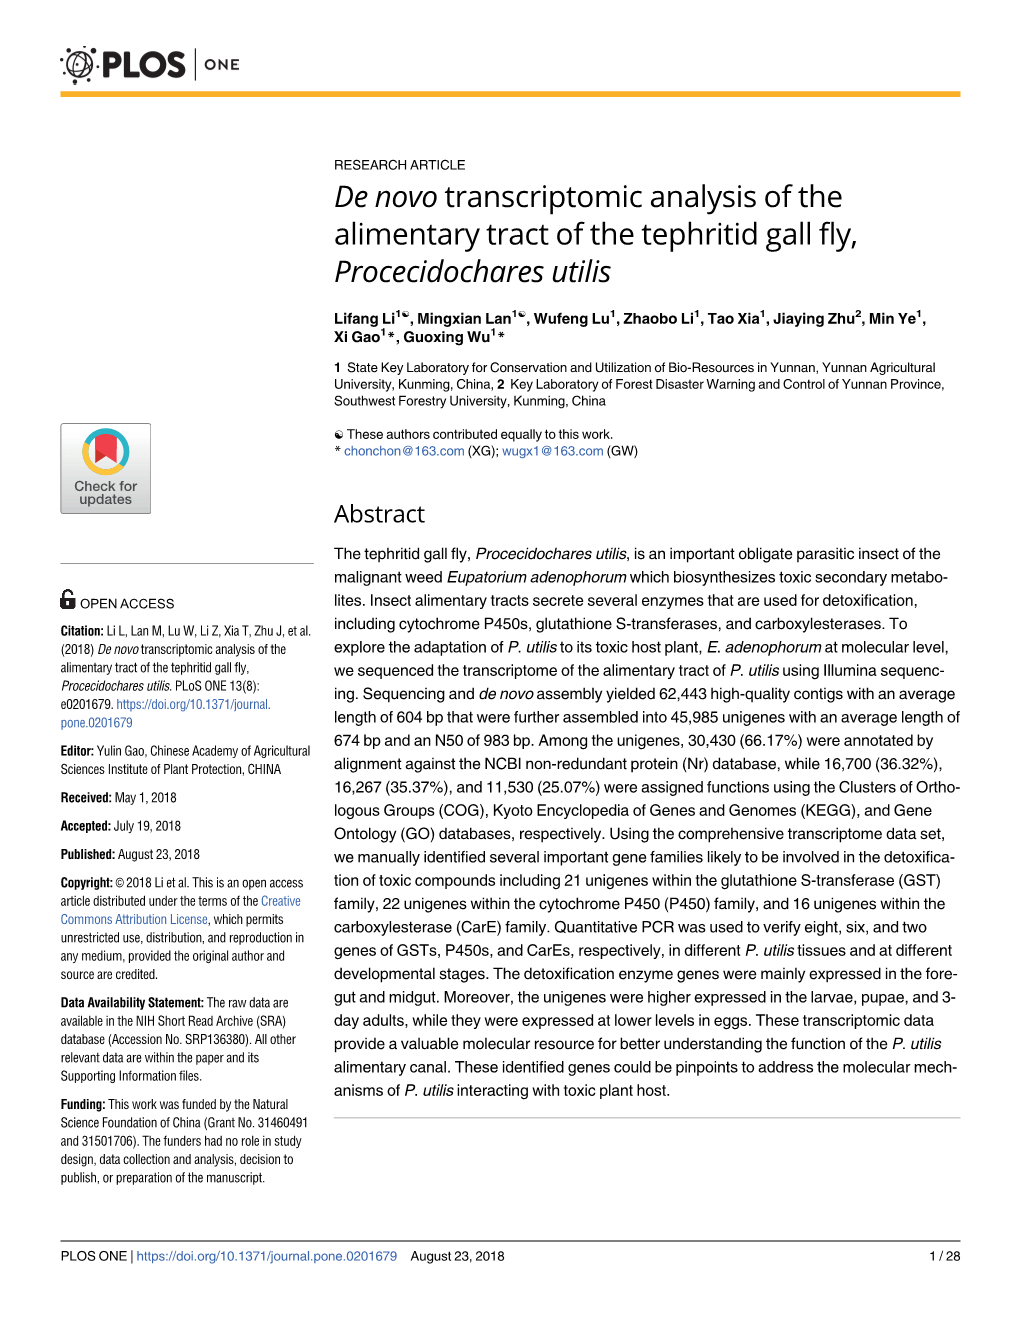 De Novo Transcriptomic Analysis of the Alimentary Tract of the Tephritid Gall Fly, Procecidochares Utilis